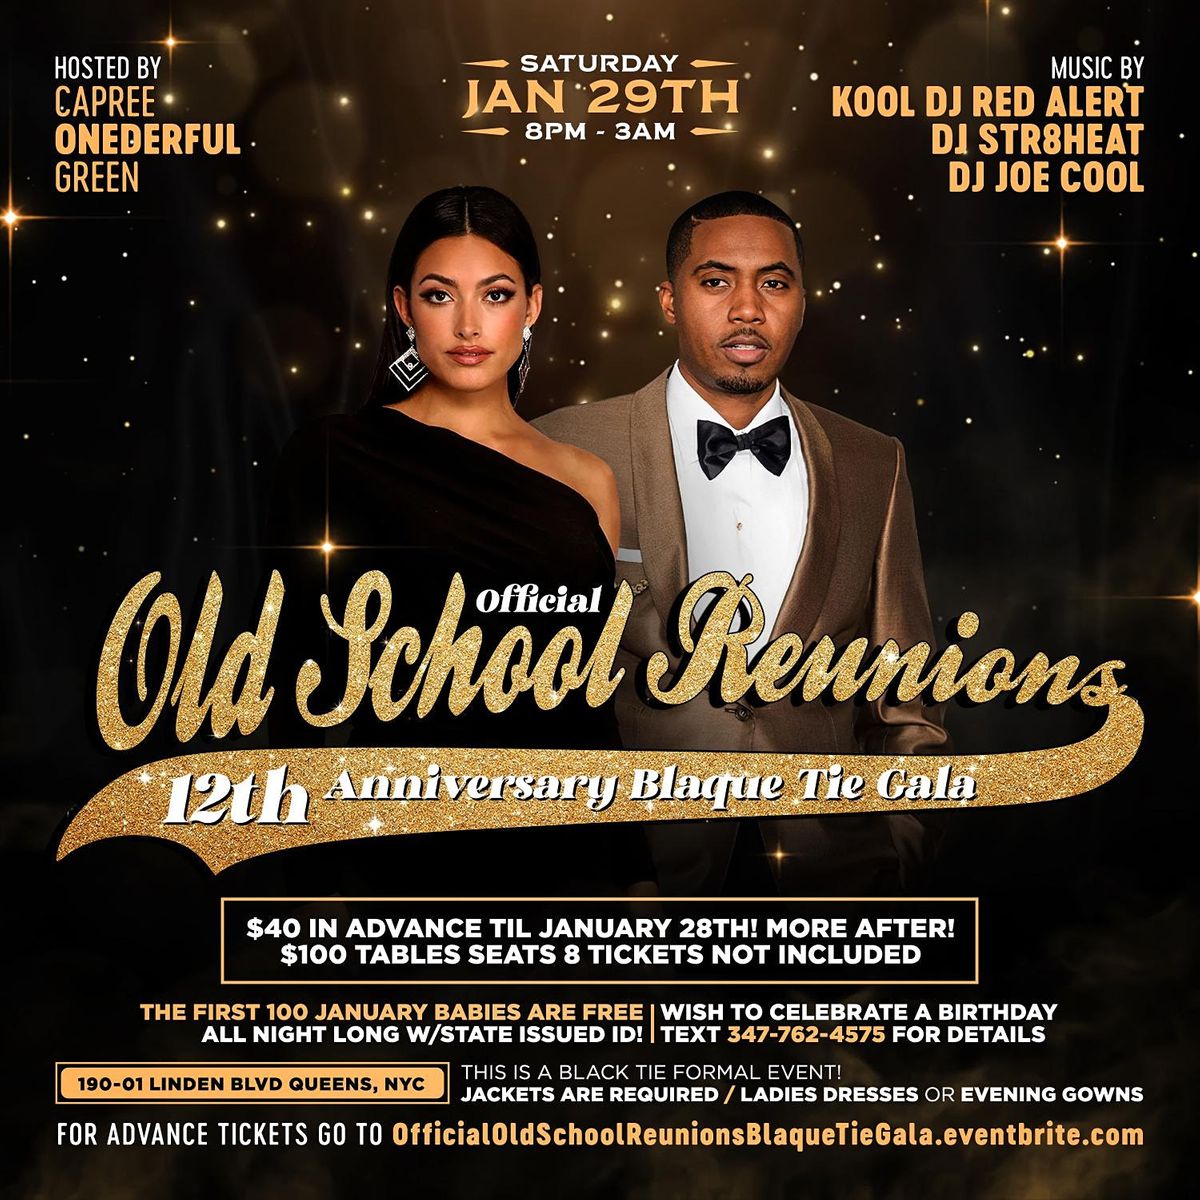 The Official Oldschool Reunions 12th Anniversary Blaque Tie Gala